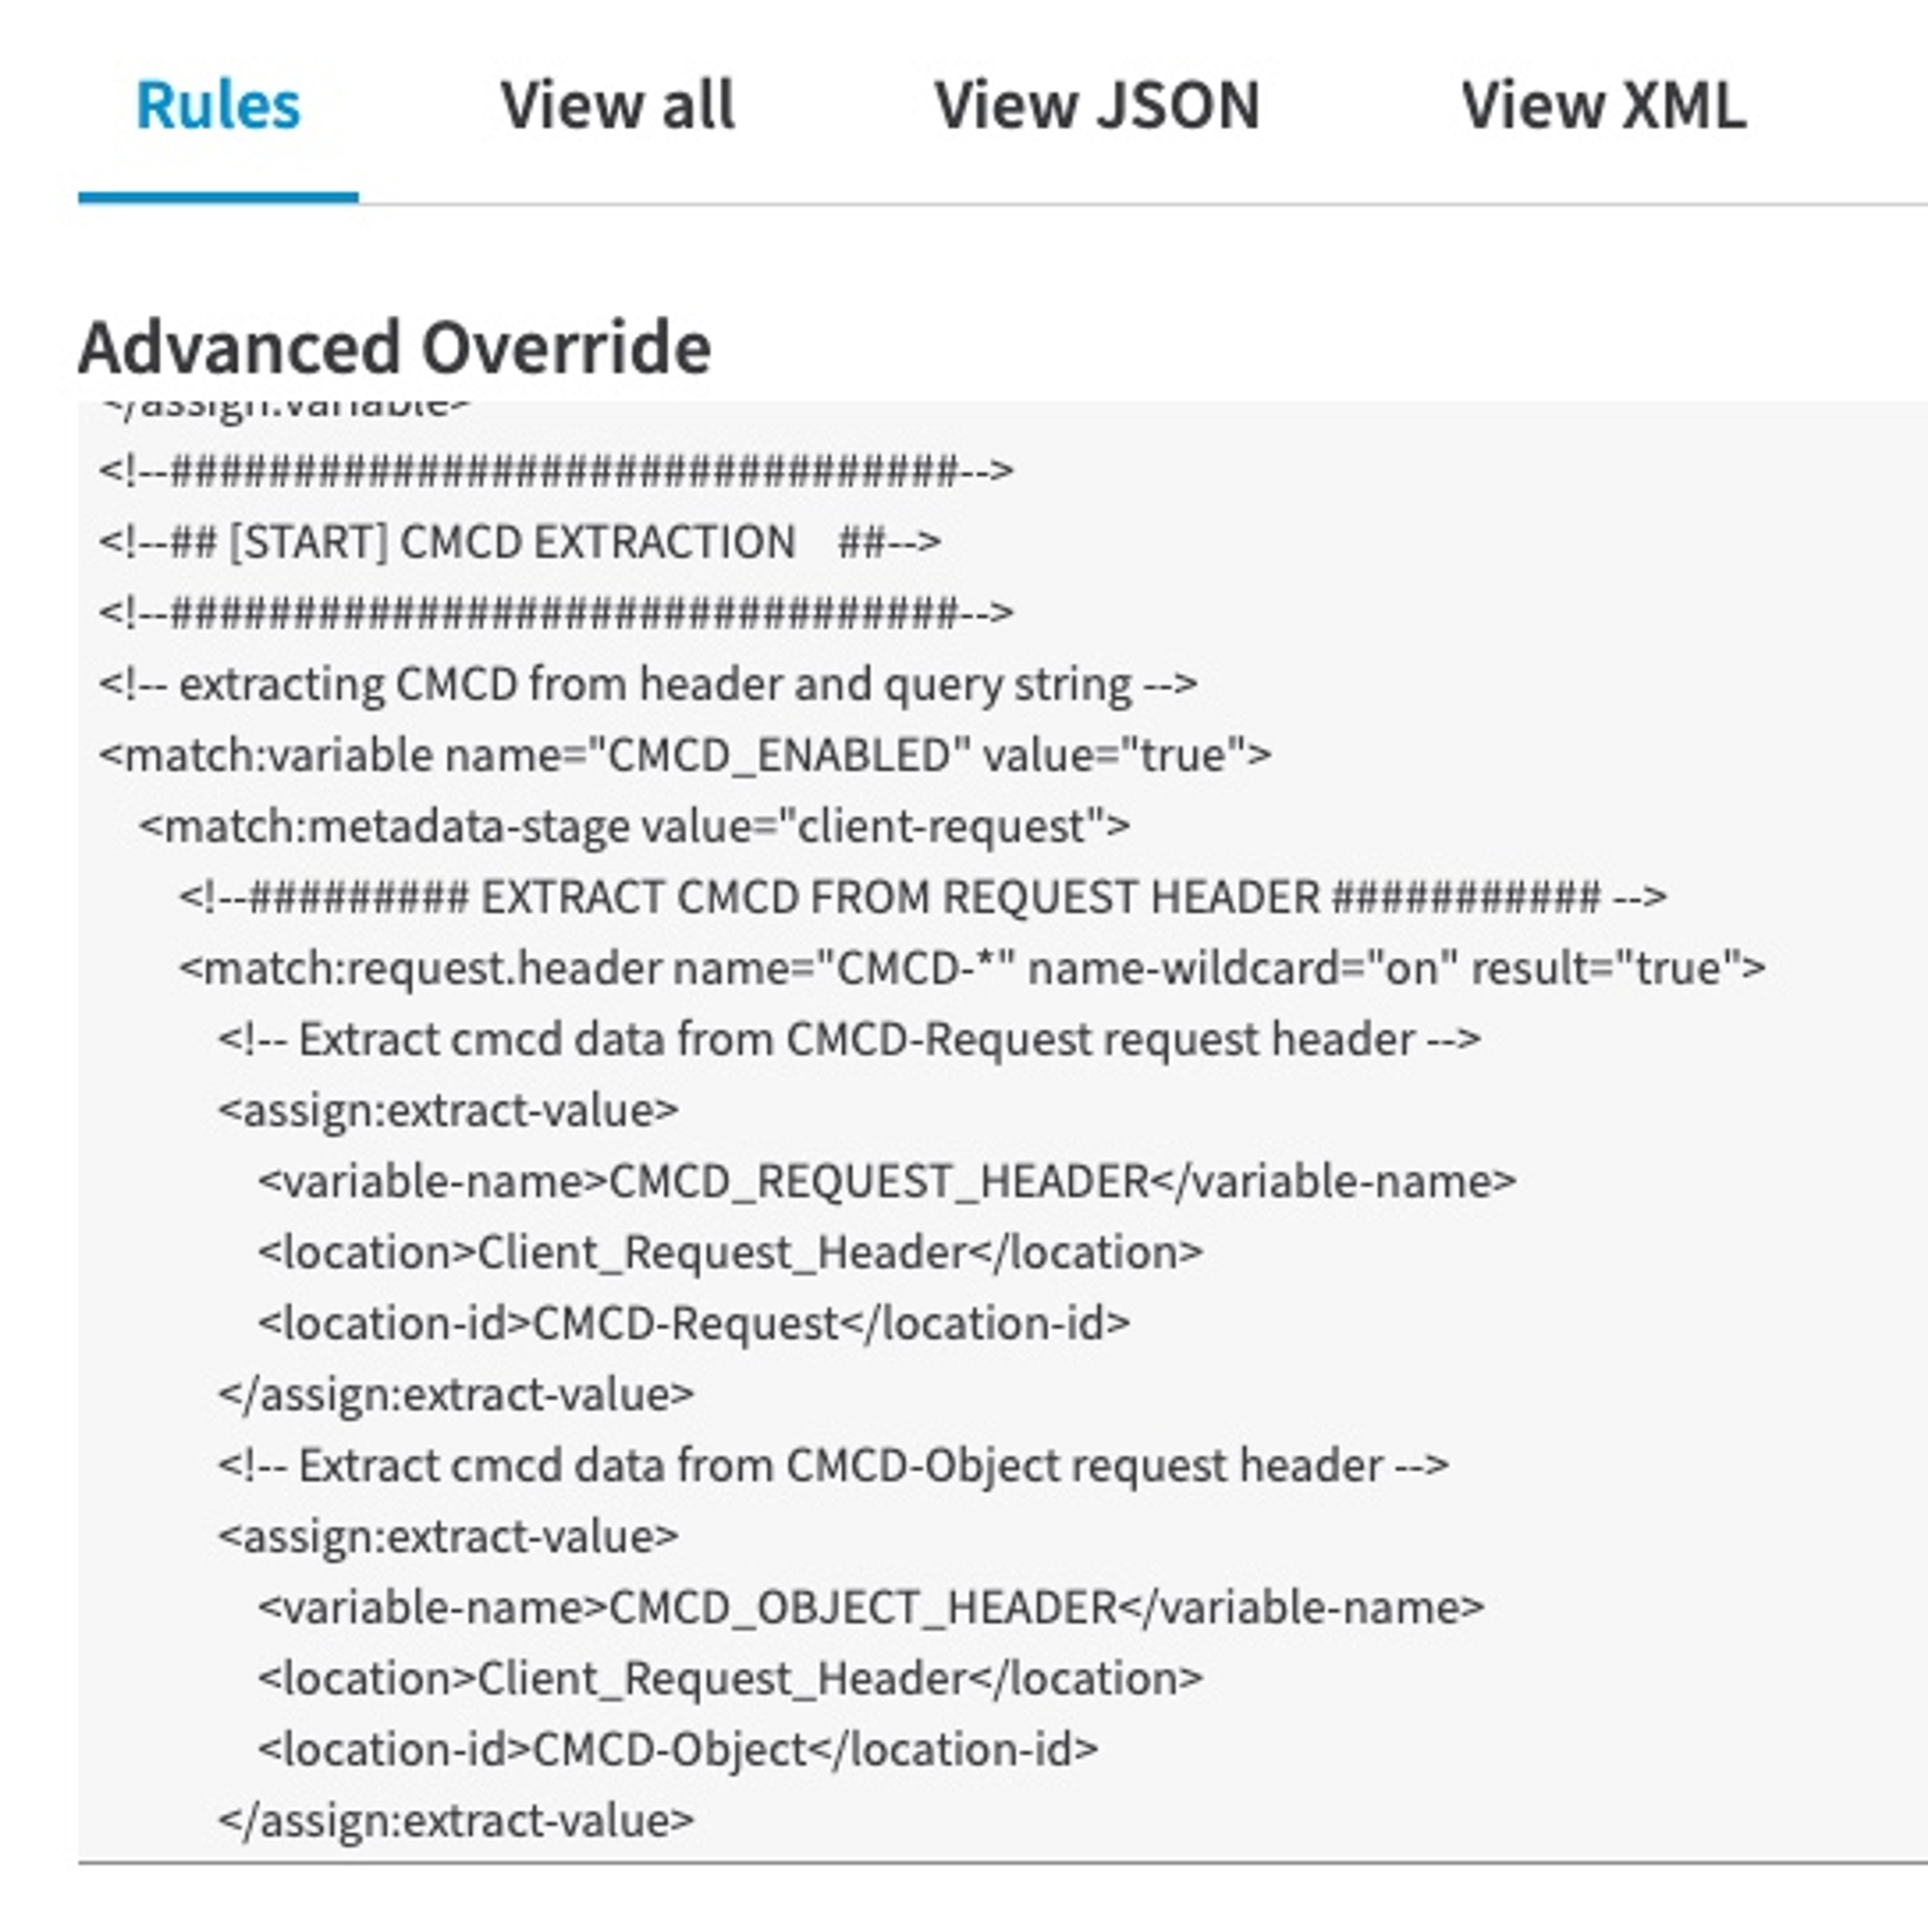 An image of advanced override CMCD request